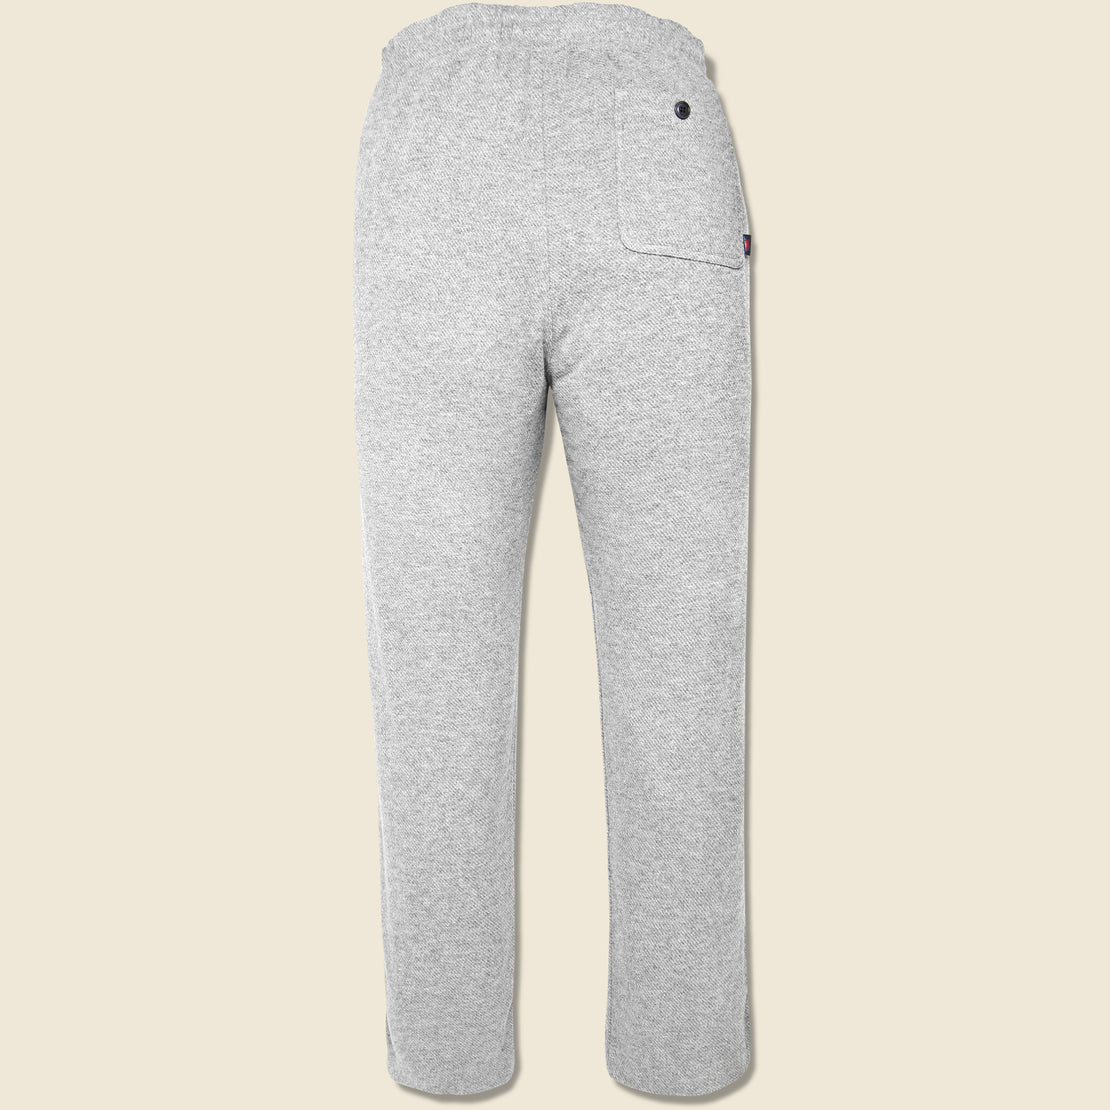 Legend Sweatpant - Fossil Grey Twill - Faherty - STAG Provisions - Pants - Lounge